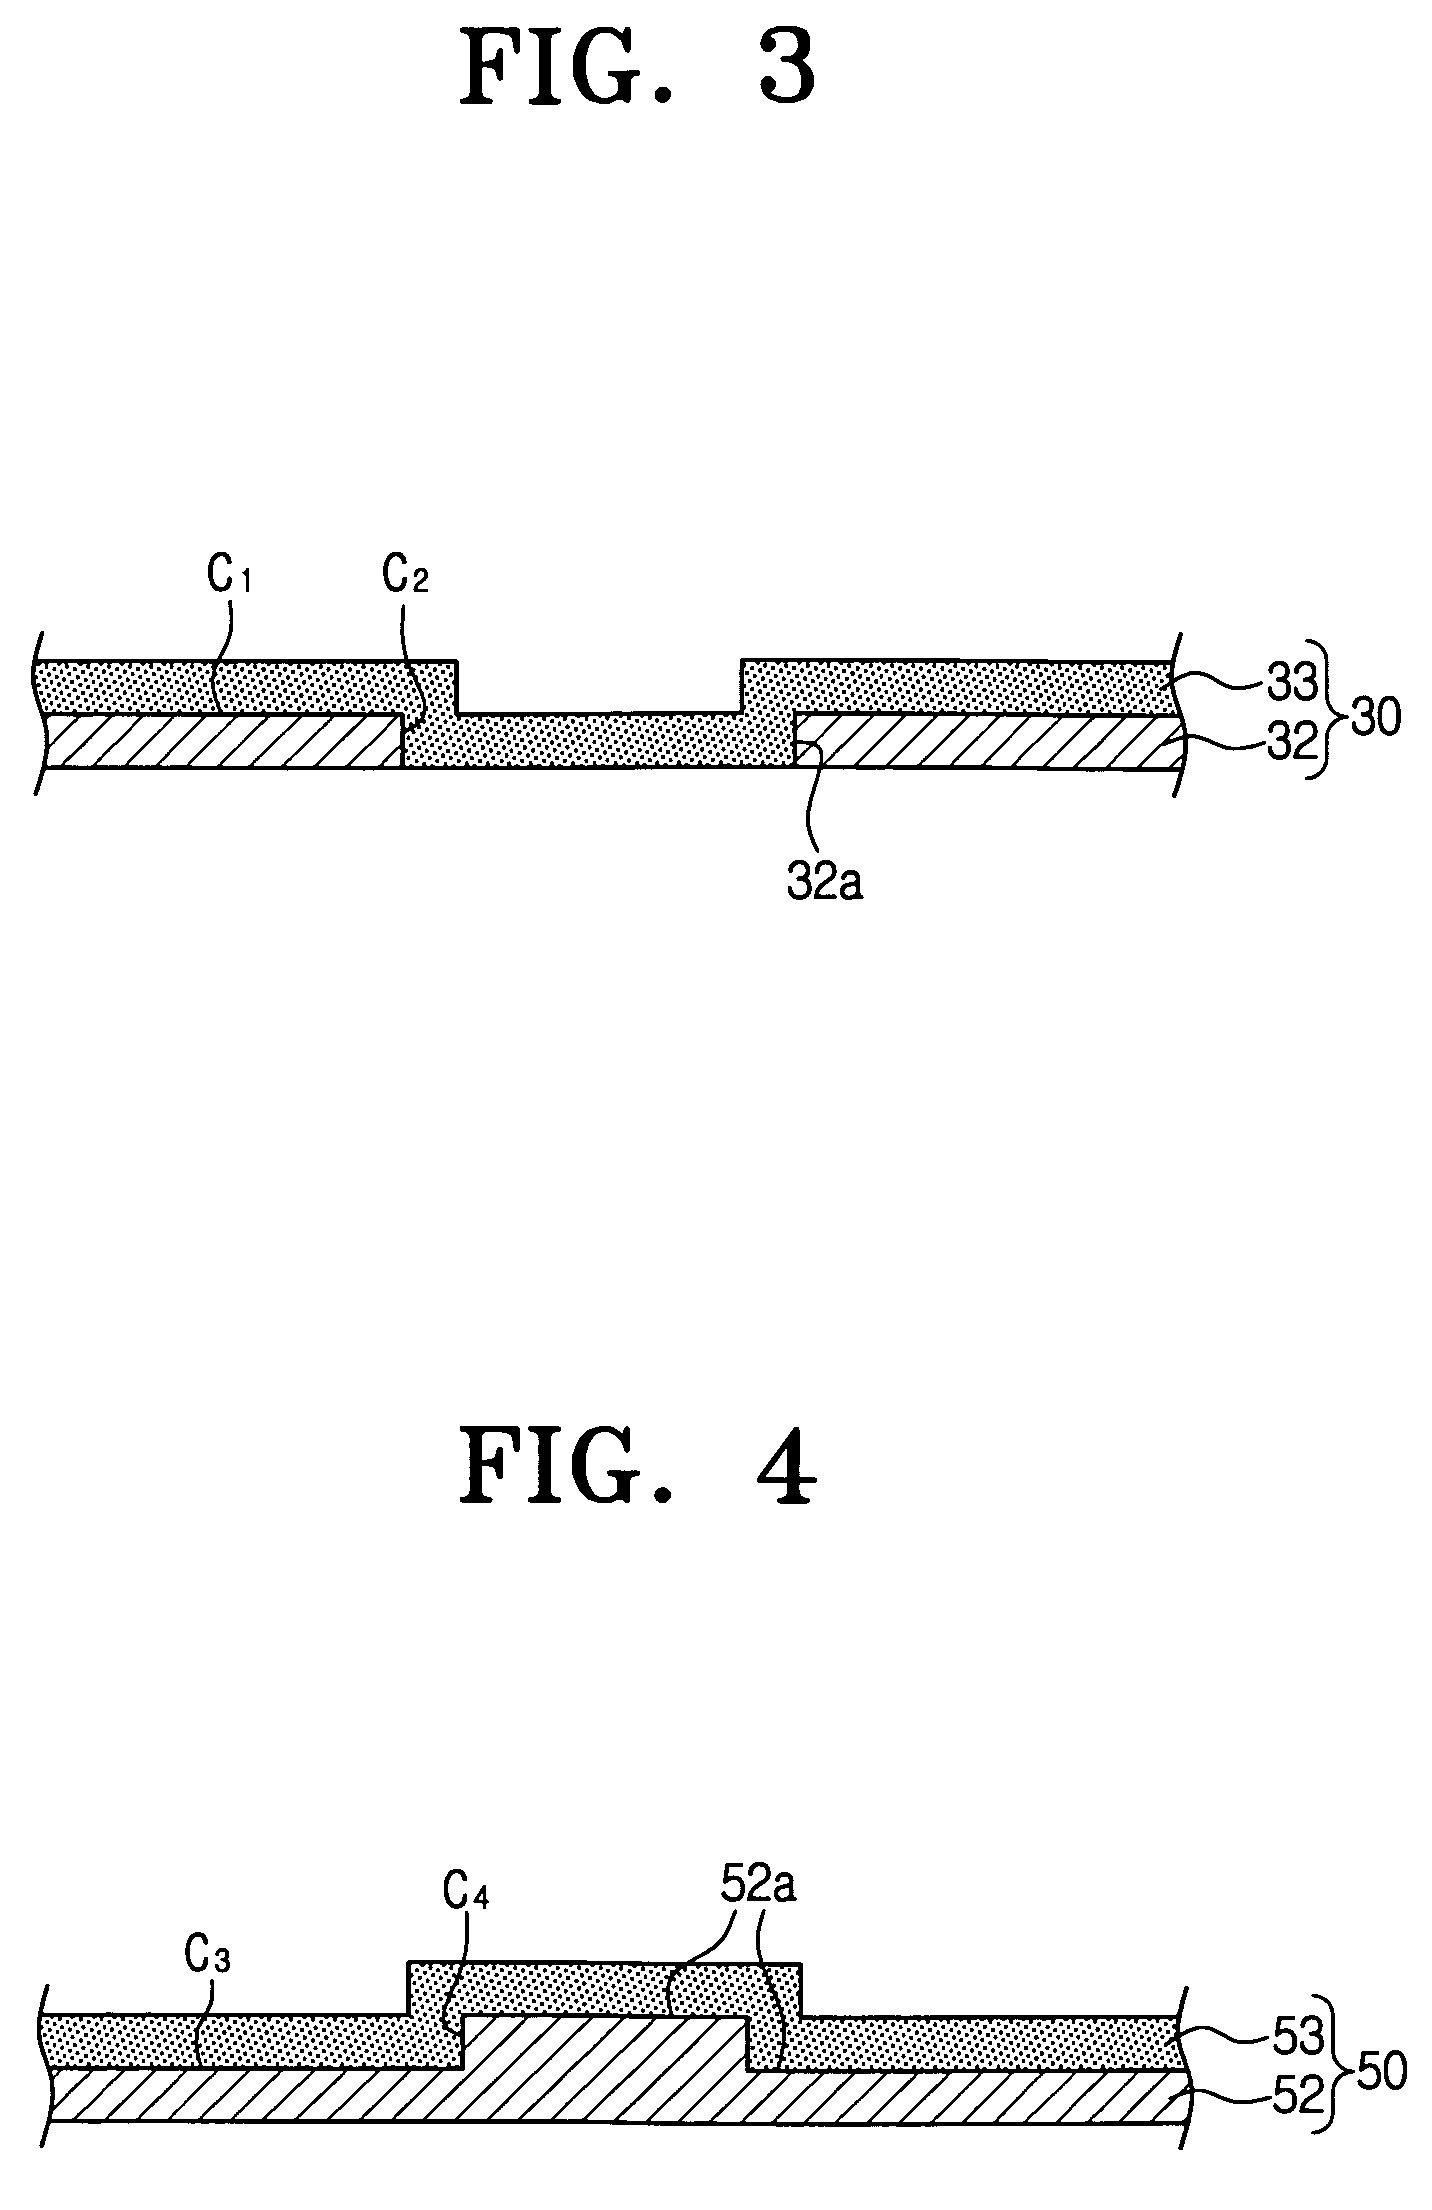 Micro thin-film structure, MEMS switch employing such a micro thin-film, and method of fabricating them